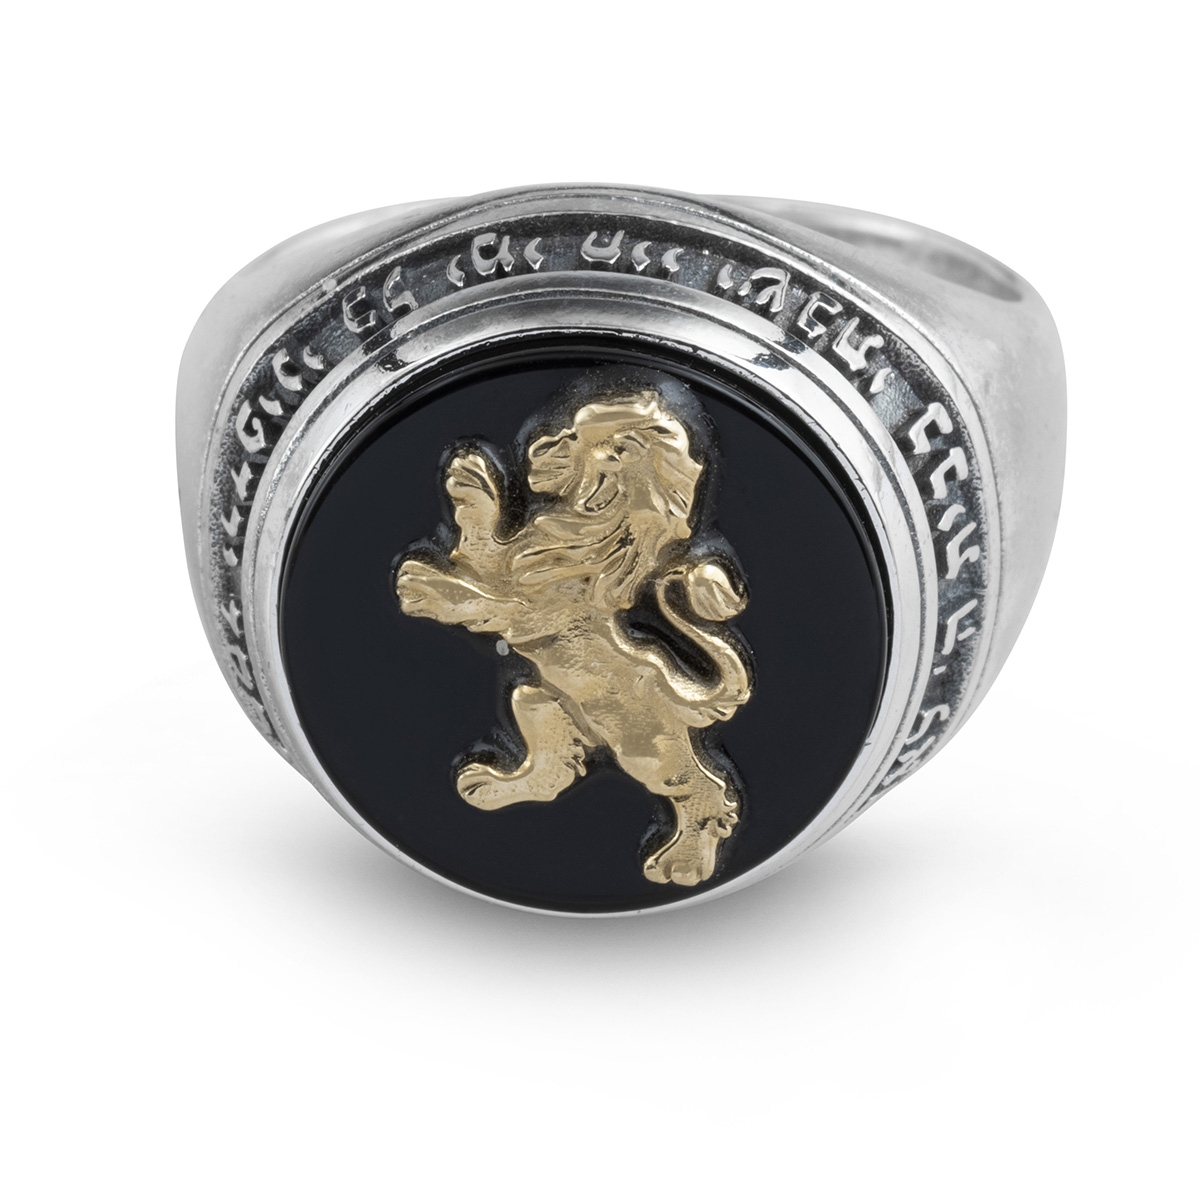 Rafael Jewelry Handcrafted Sterling Silver and Onyx Stone Ring With 14K Yellow Gold Lion of Judah Design - 1